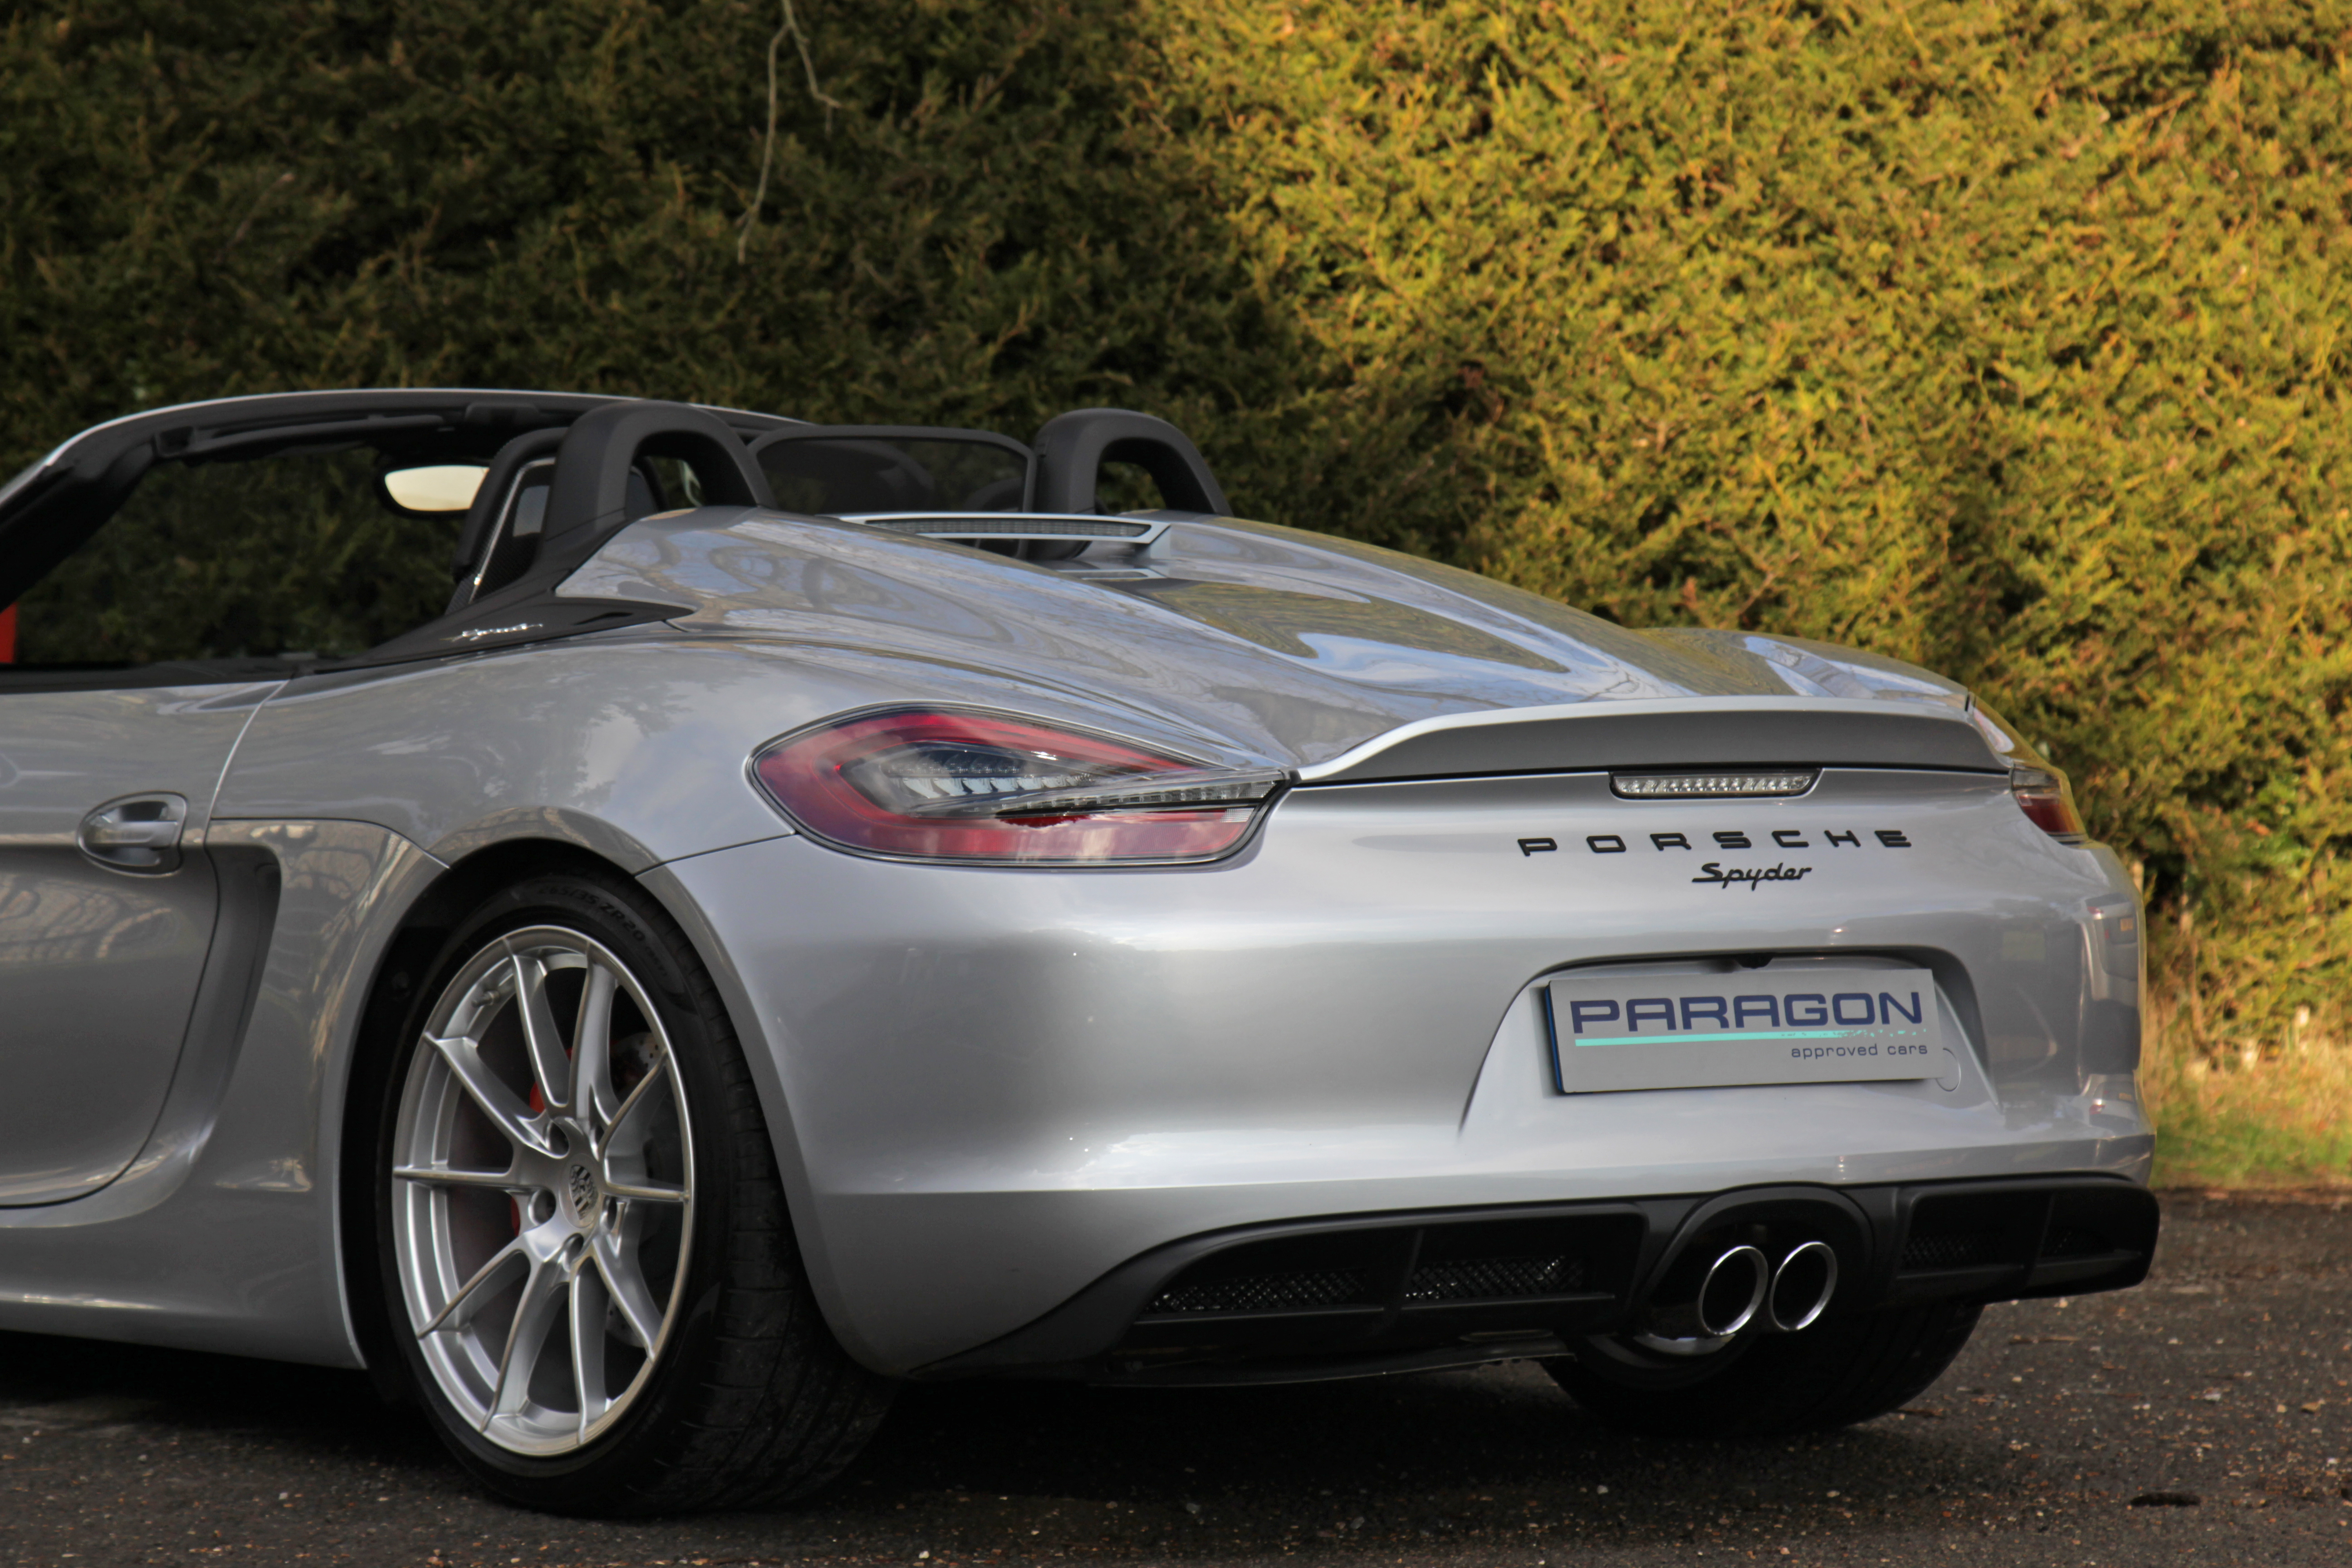 Boxster Spyder (981) for sale at Paragon Porsche in East Sussex